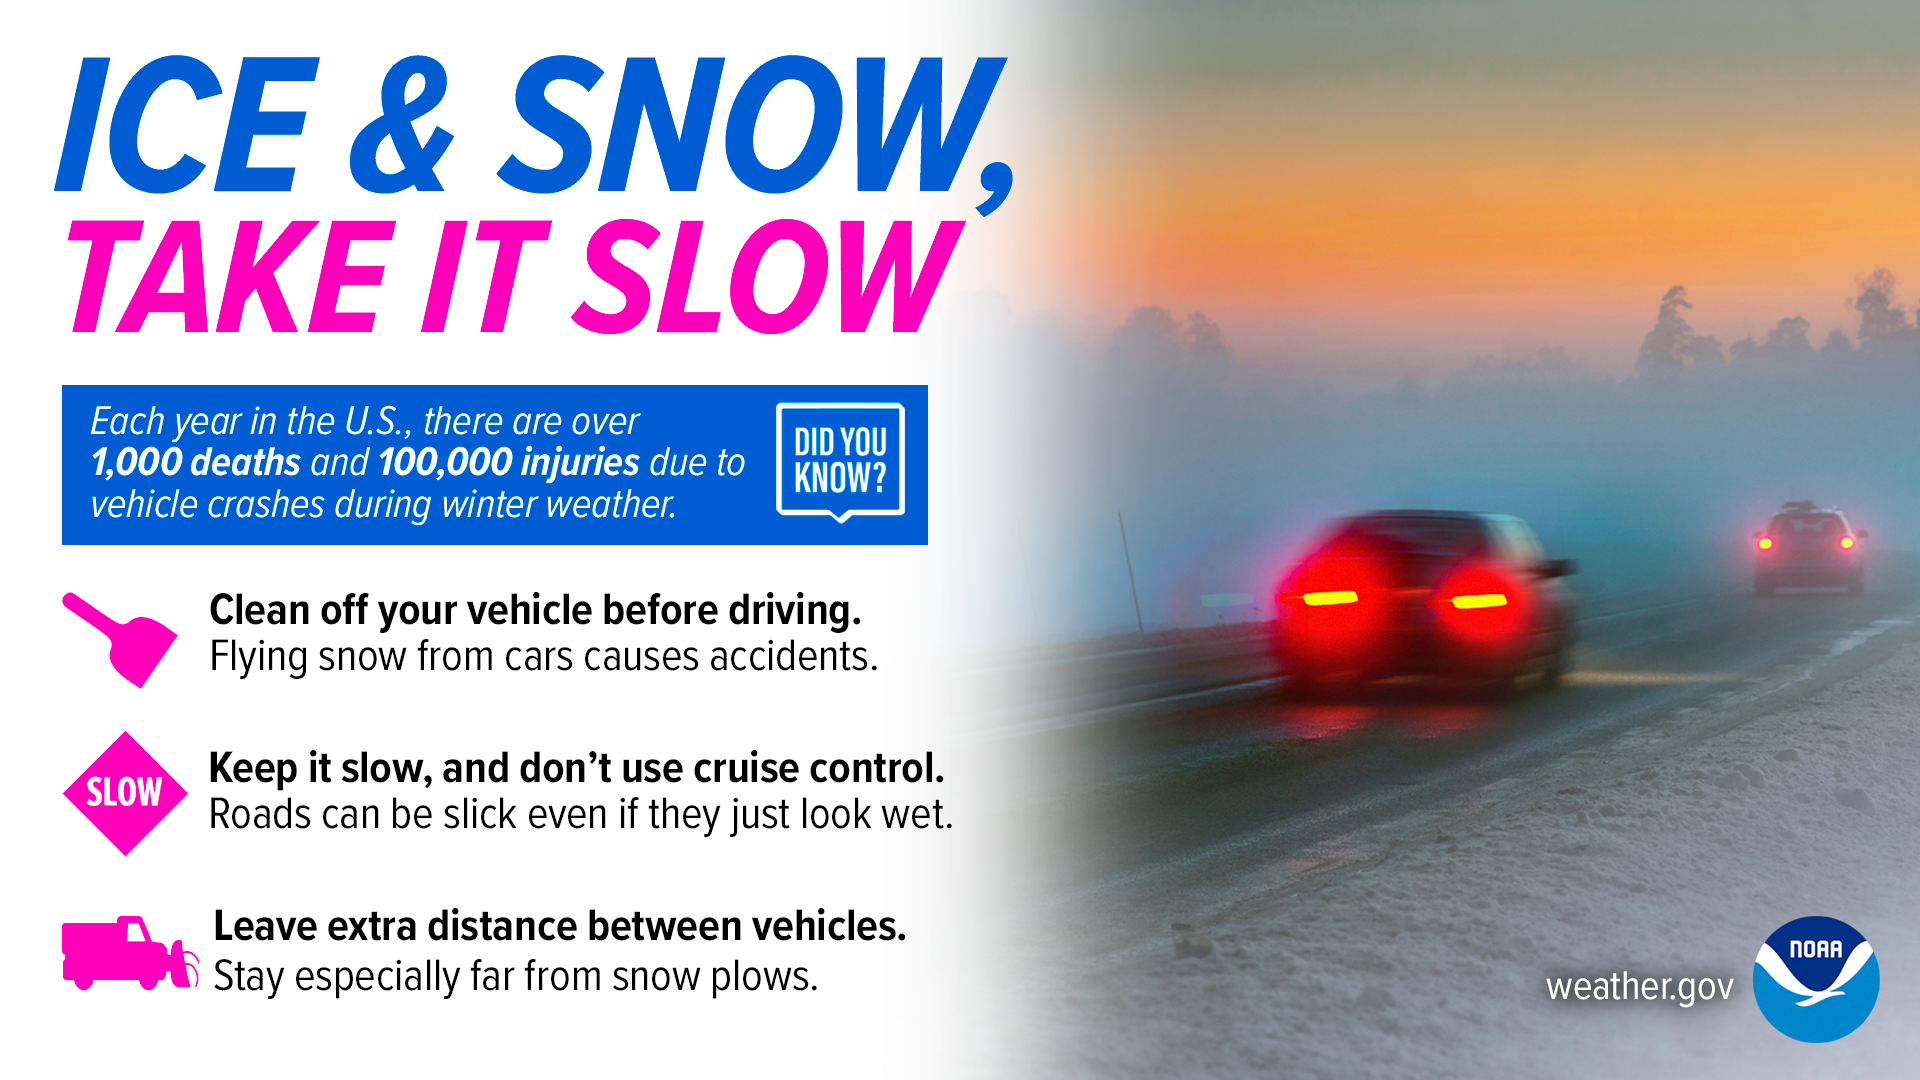 Ice and Snow, Take It Slow. Did you know? Each year in the United States, there are over 1,000 deaths and 100,000 injuries due to vehicle crashes during winter weather.
Clean off your vehicle before driving. Flying snow from cars causes accidents.
Keep it slow, and don’t use cruise control. Roads can be slick even if they just look wet.
Leave extra distance between vehicles. Stay especially far from snow plows.
